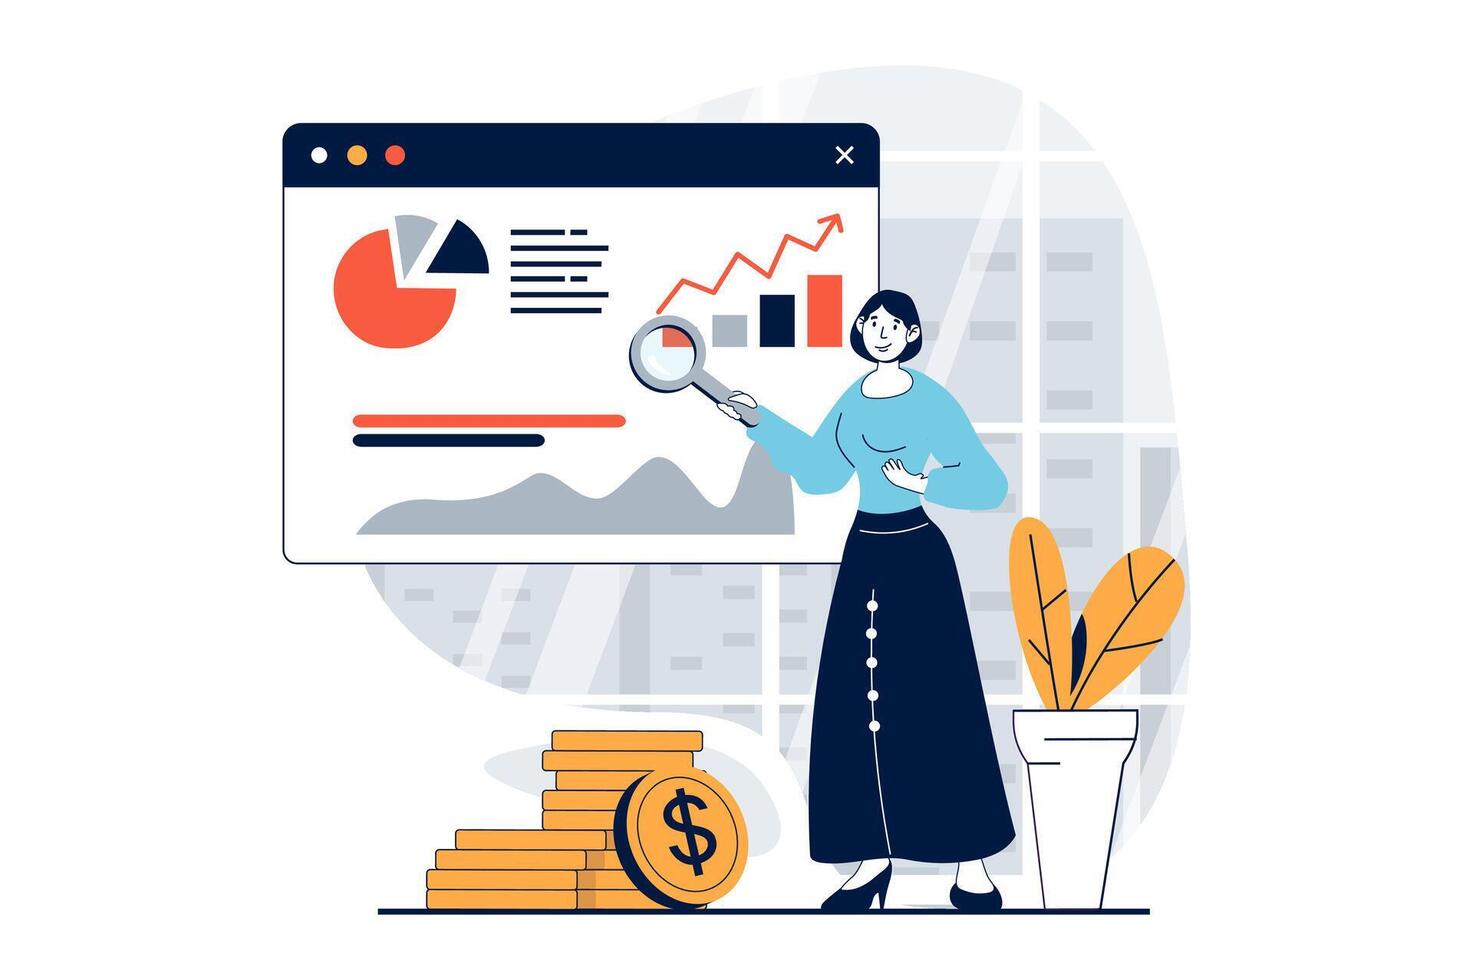 Data science concept with people scene in flat design for web. Woman working with graphs, searching statistics for presentation report. Vector illustration for social media banner, marketing material.